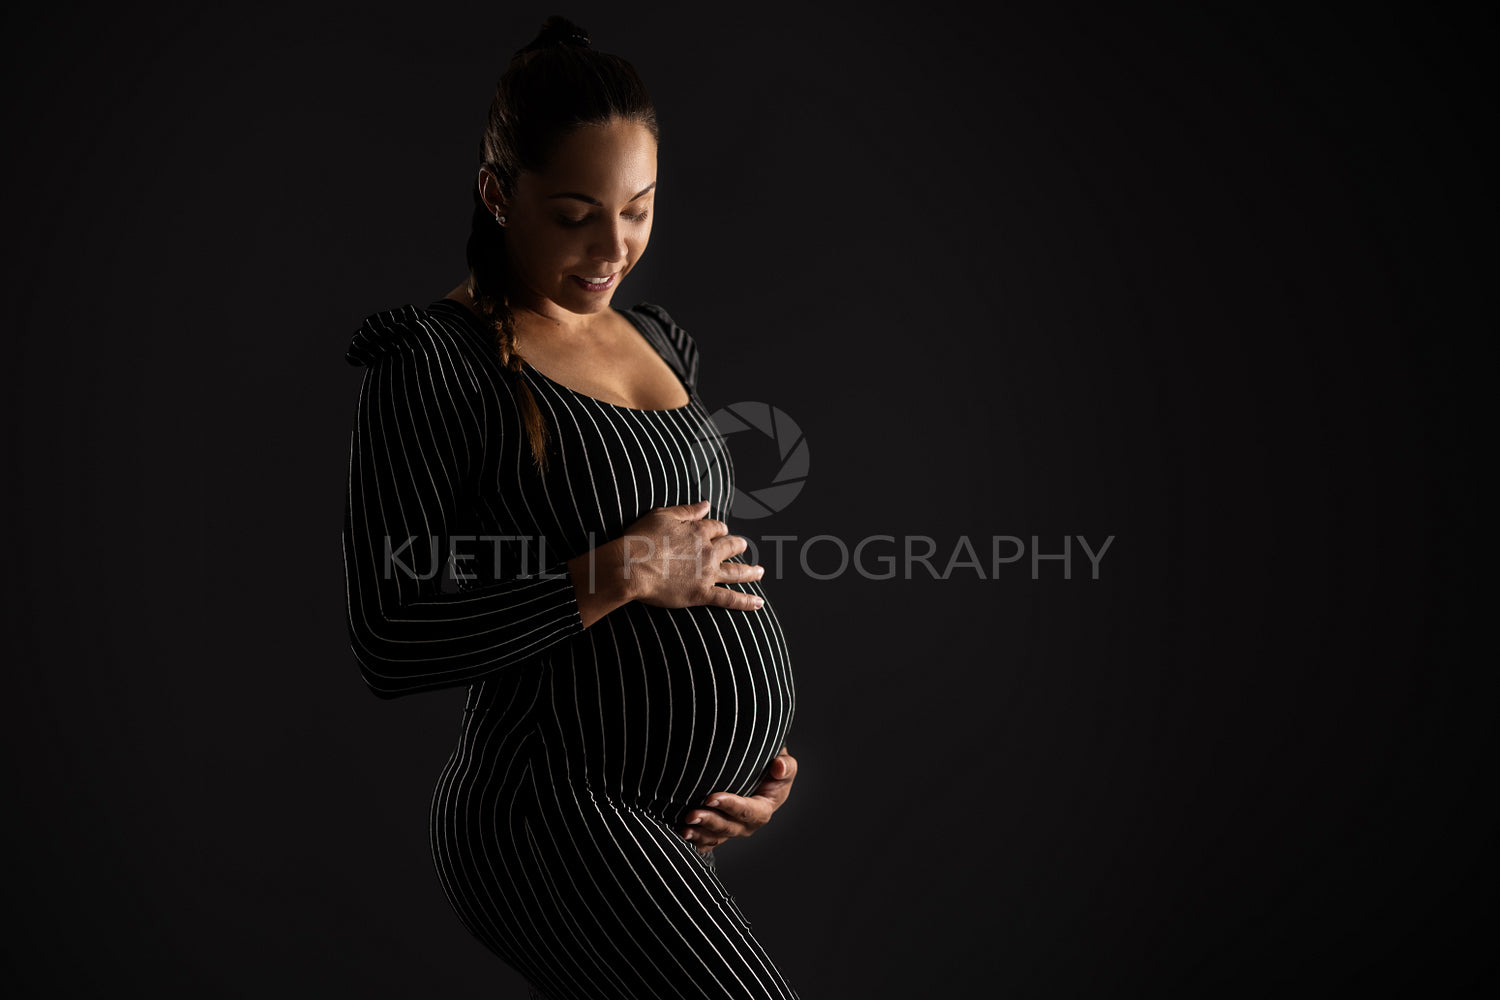 Smiling Pregnant Woman in Striped Dress with Black Background